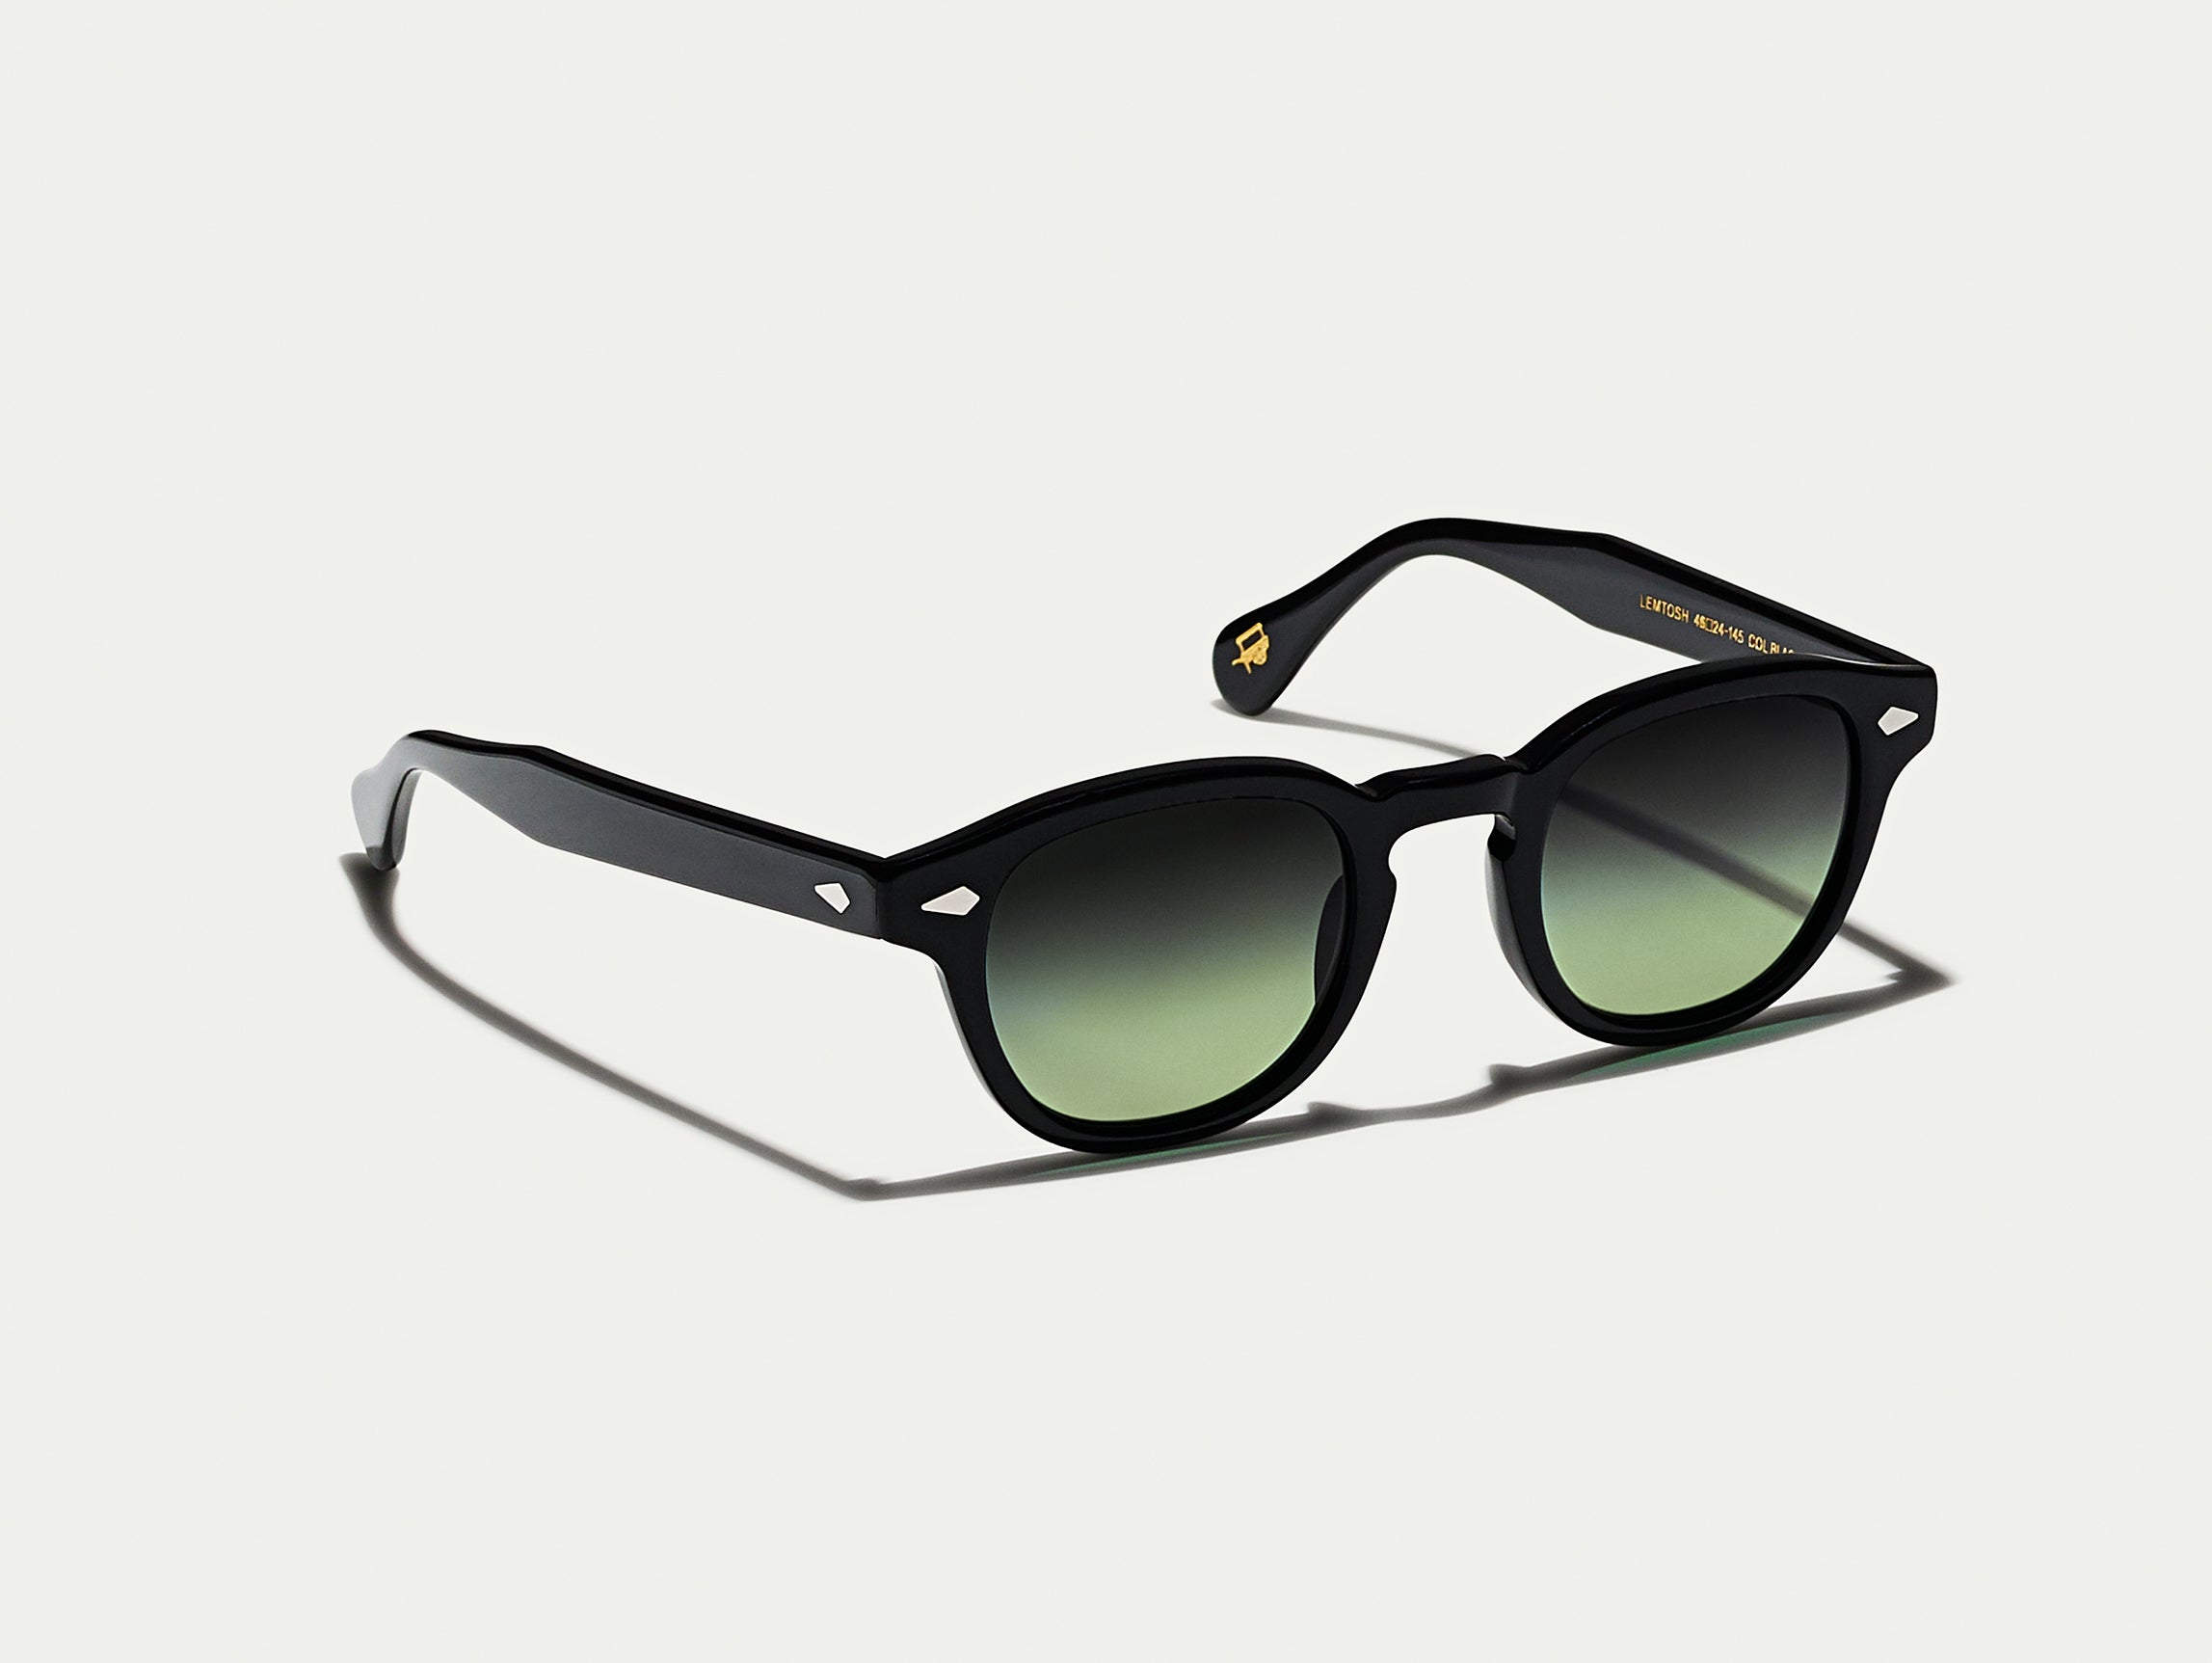 The LEMTOSH Black with Forest Wood Tinted Lenses